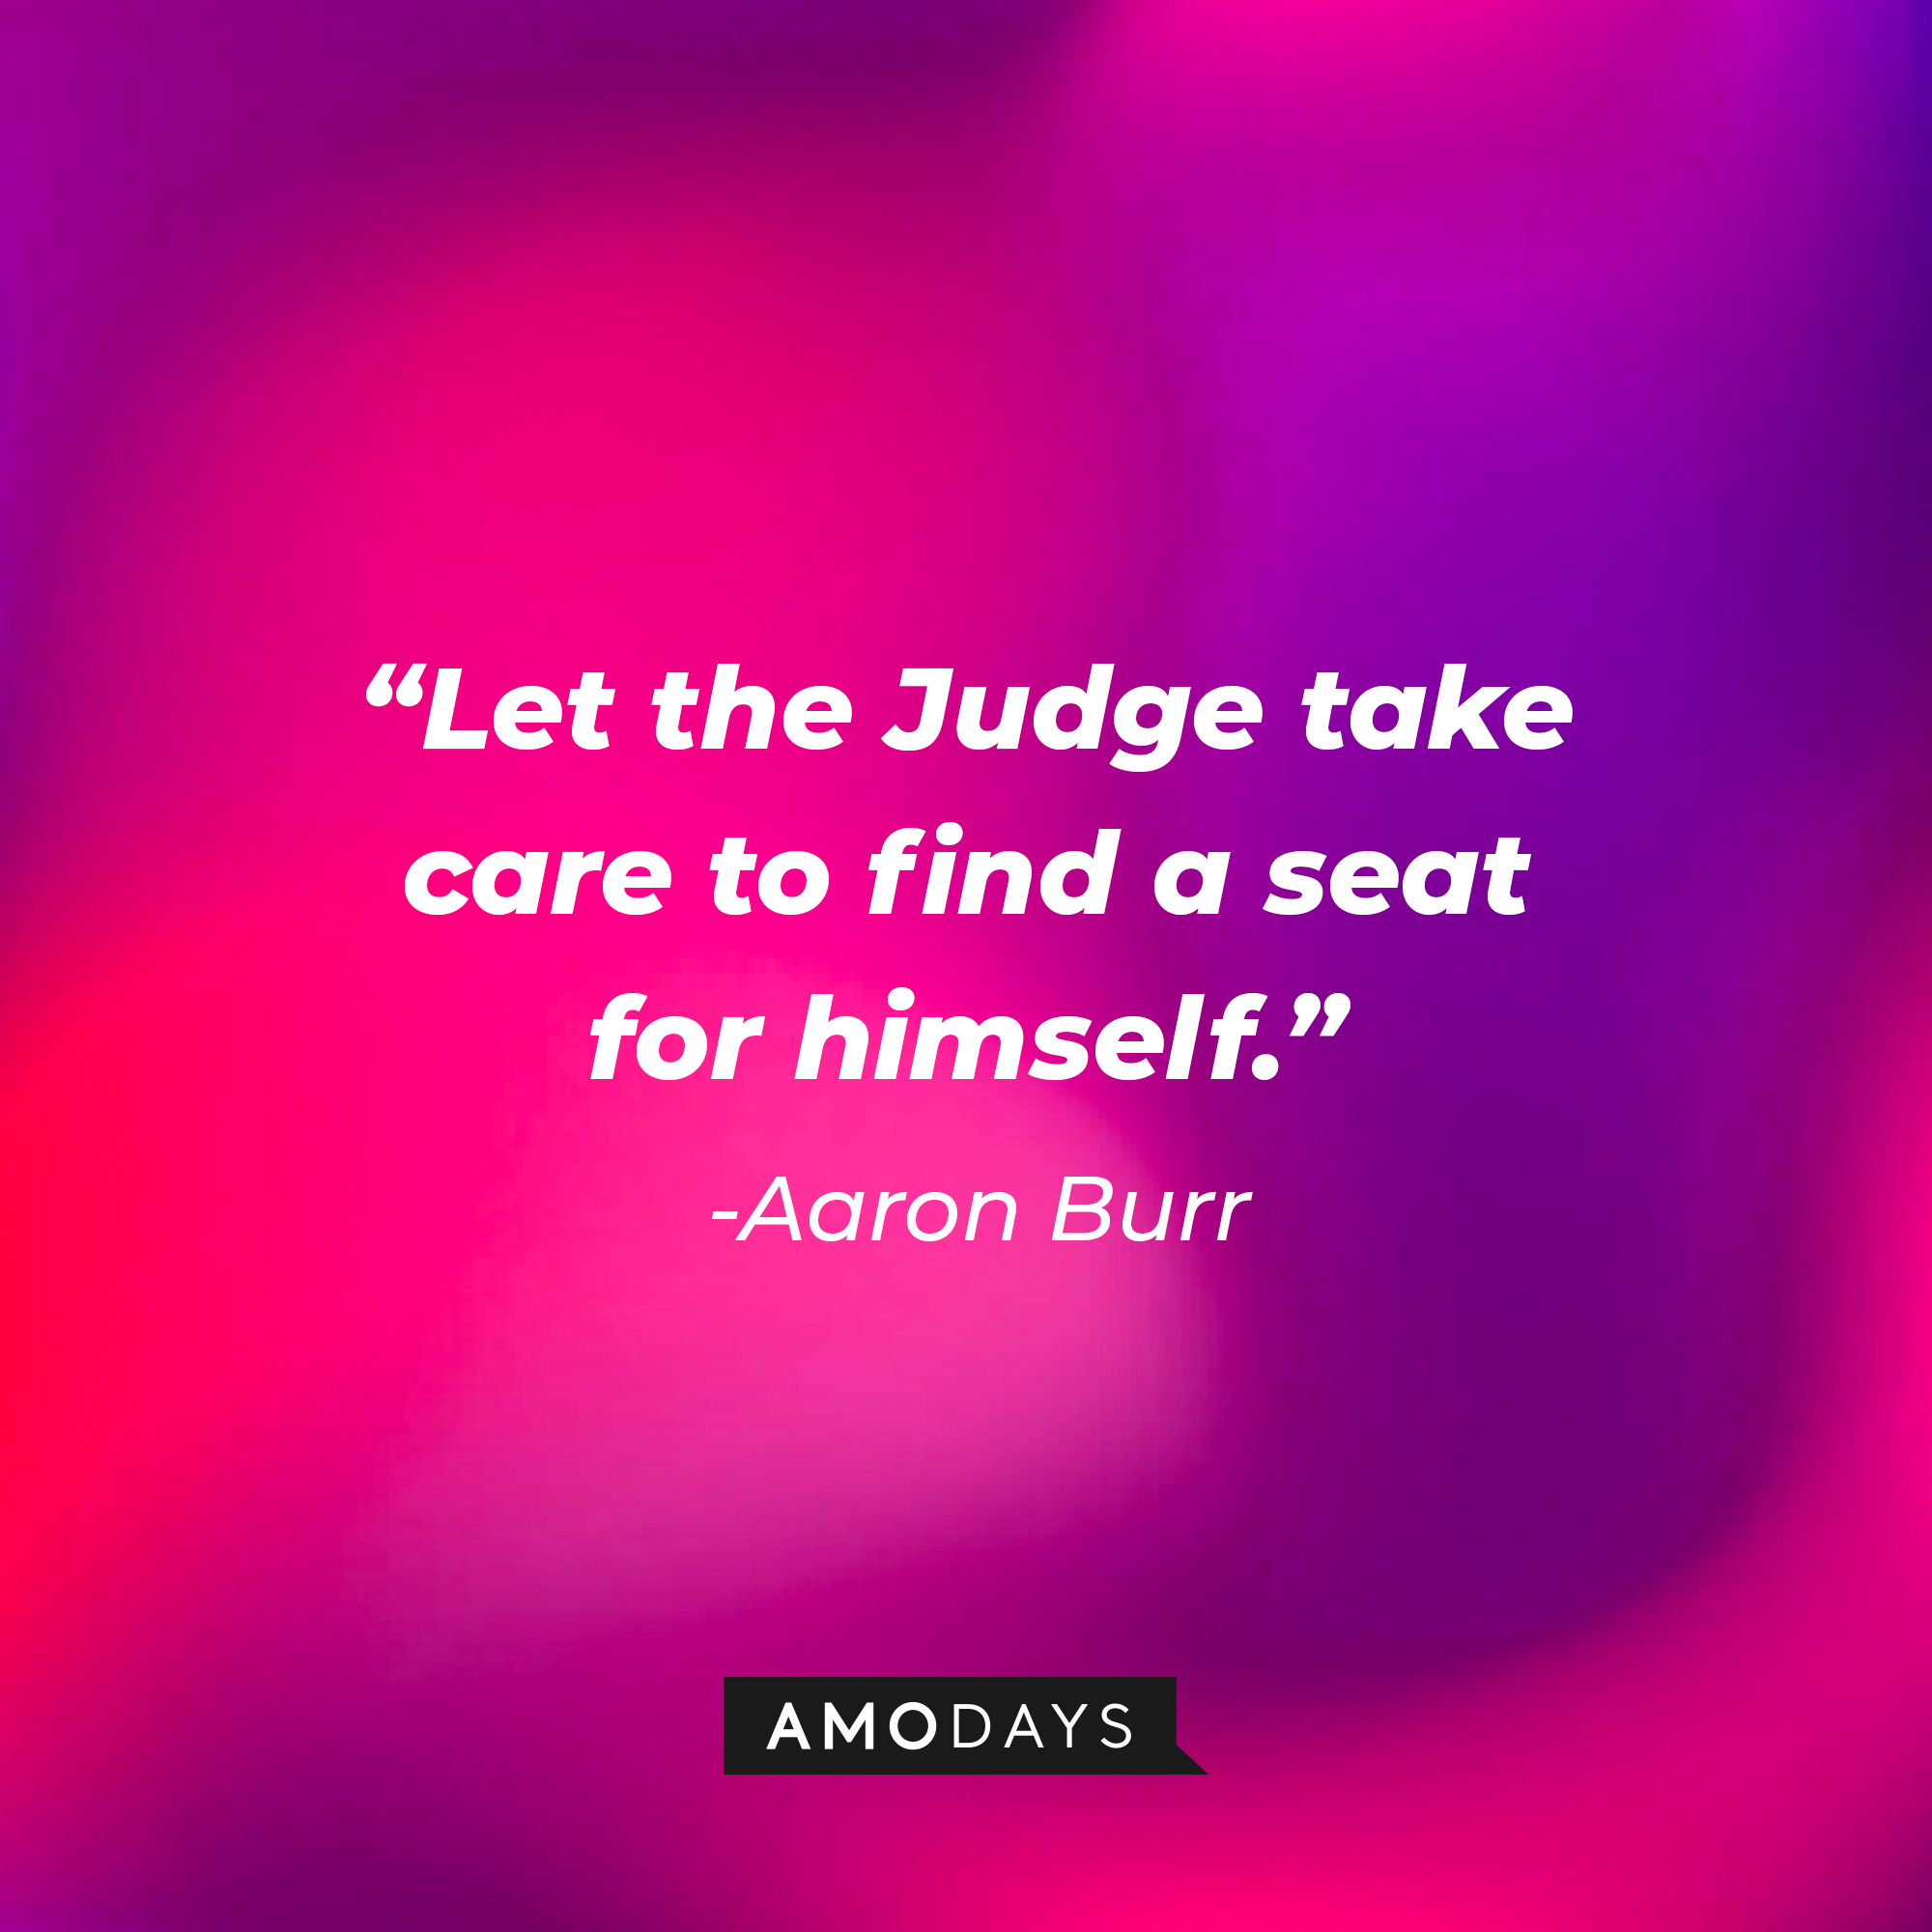 Aaron Burr’s quote: “Let the Judge take care to find a seat for himself.” | Source: AmoDays